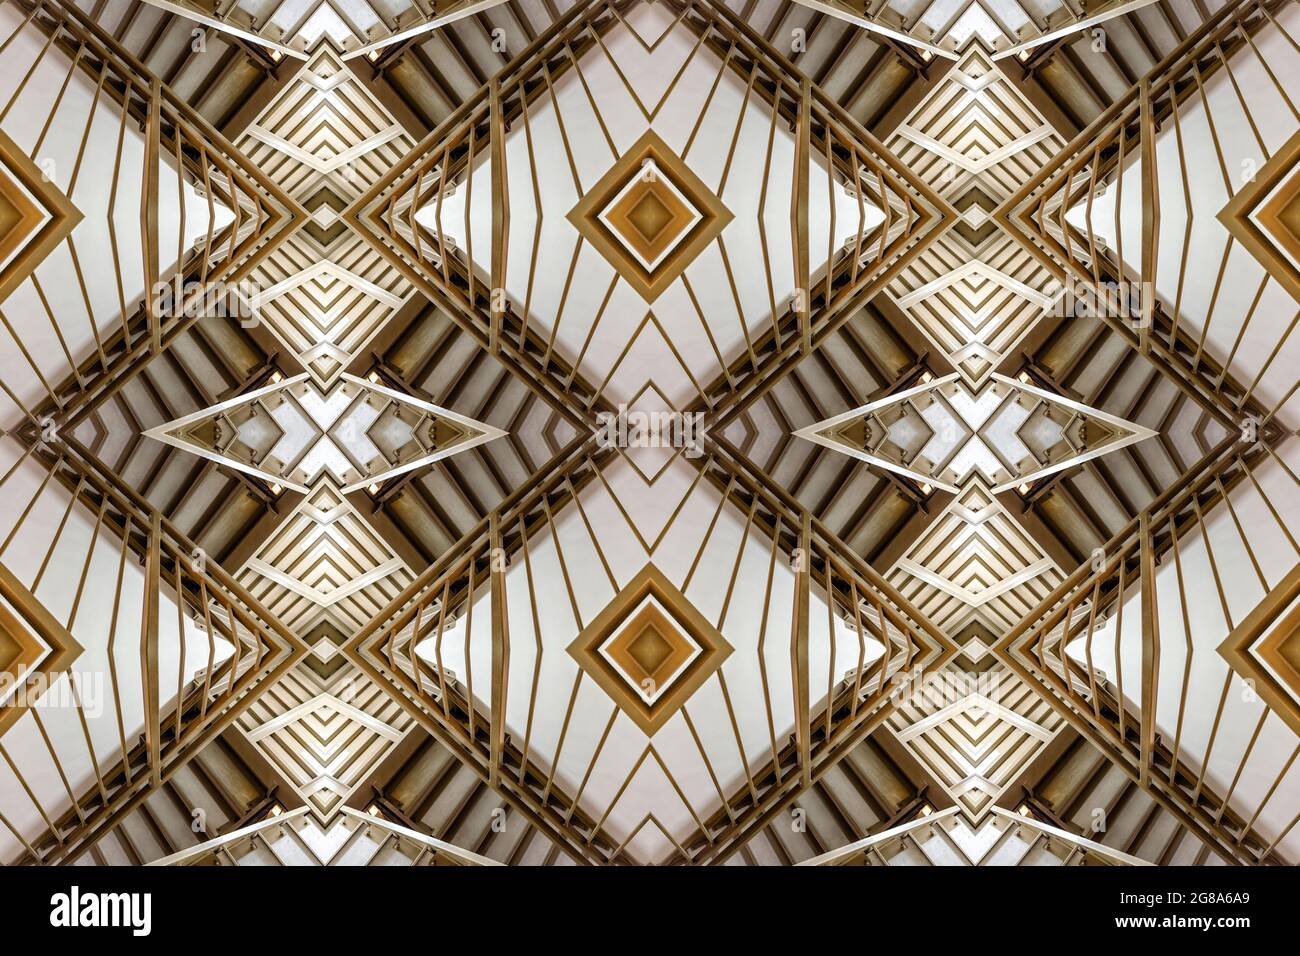 An image of a stair case, steps and railing is turned into an abstract geometric design through duplication, replication, and composite photography. Stock Photo